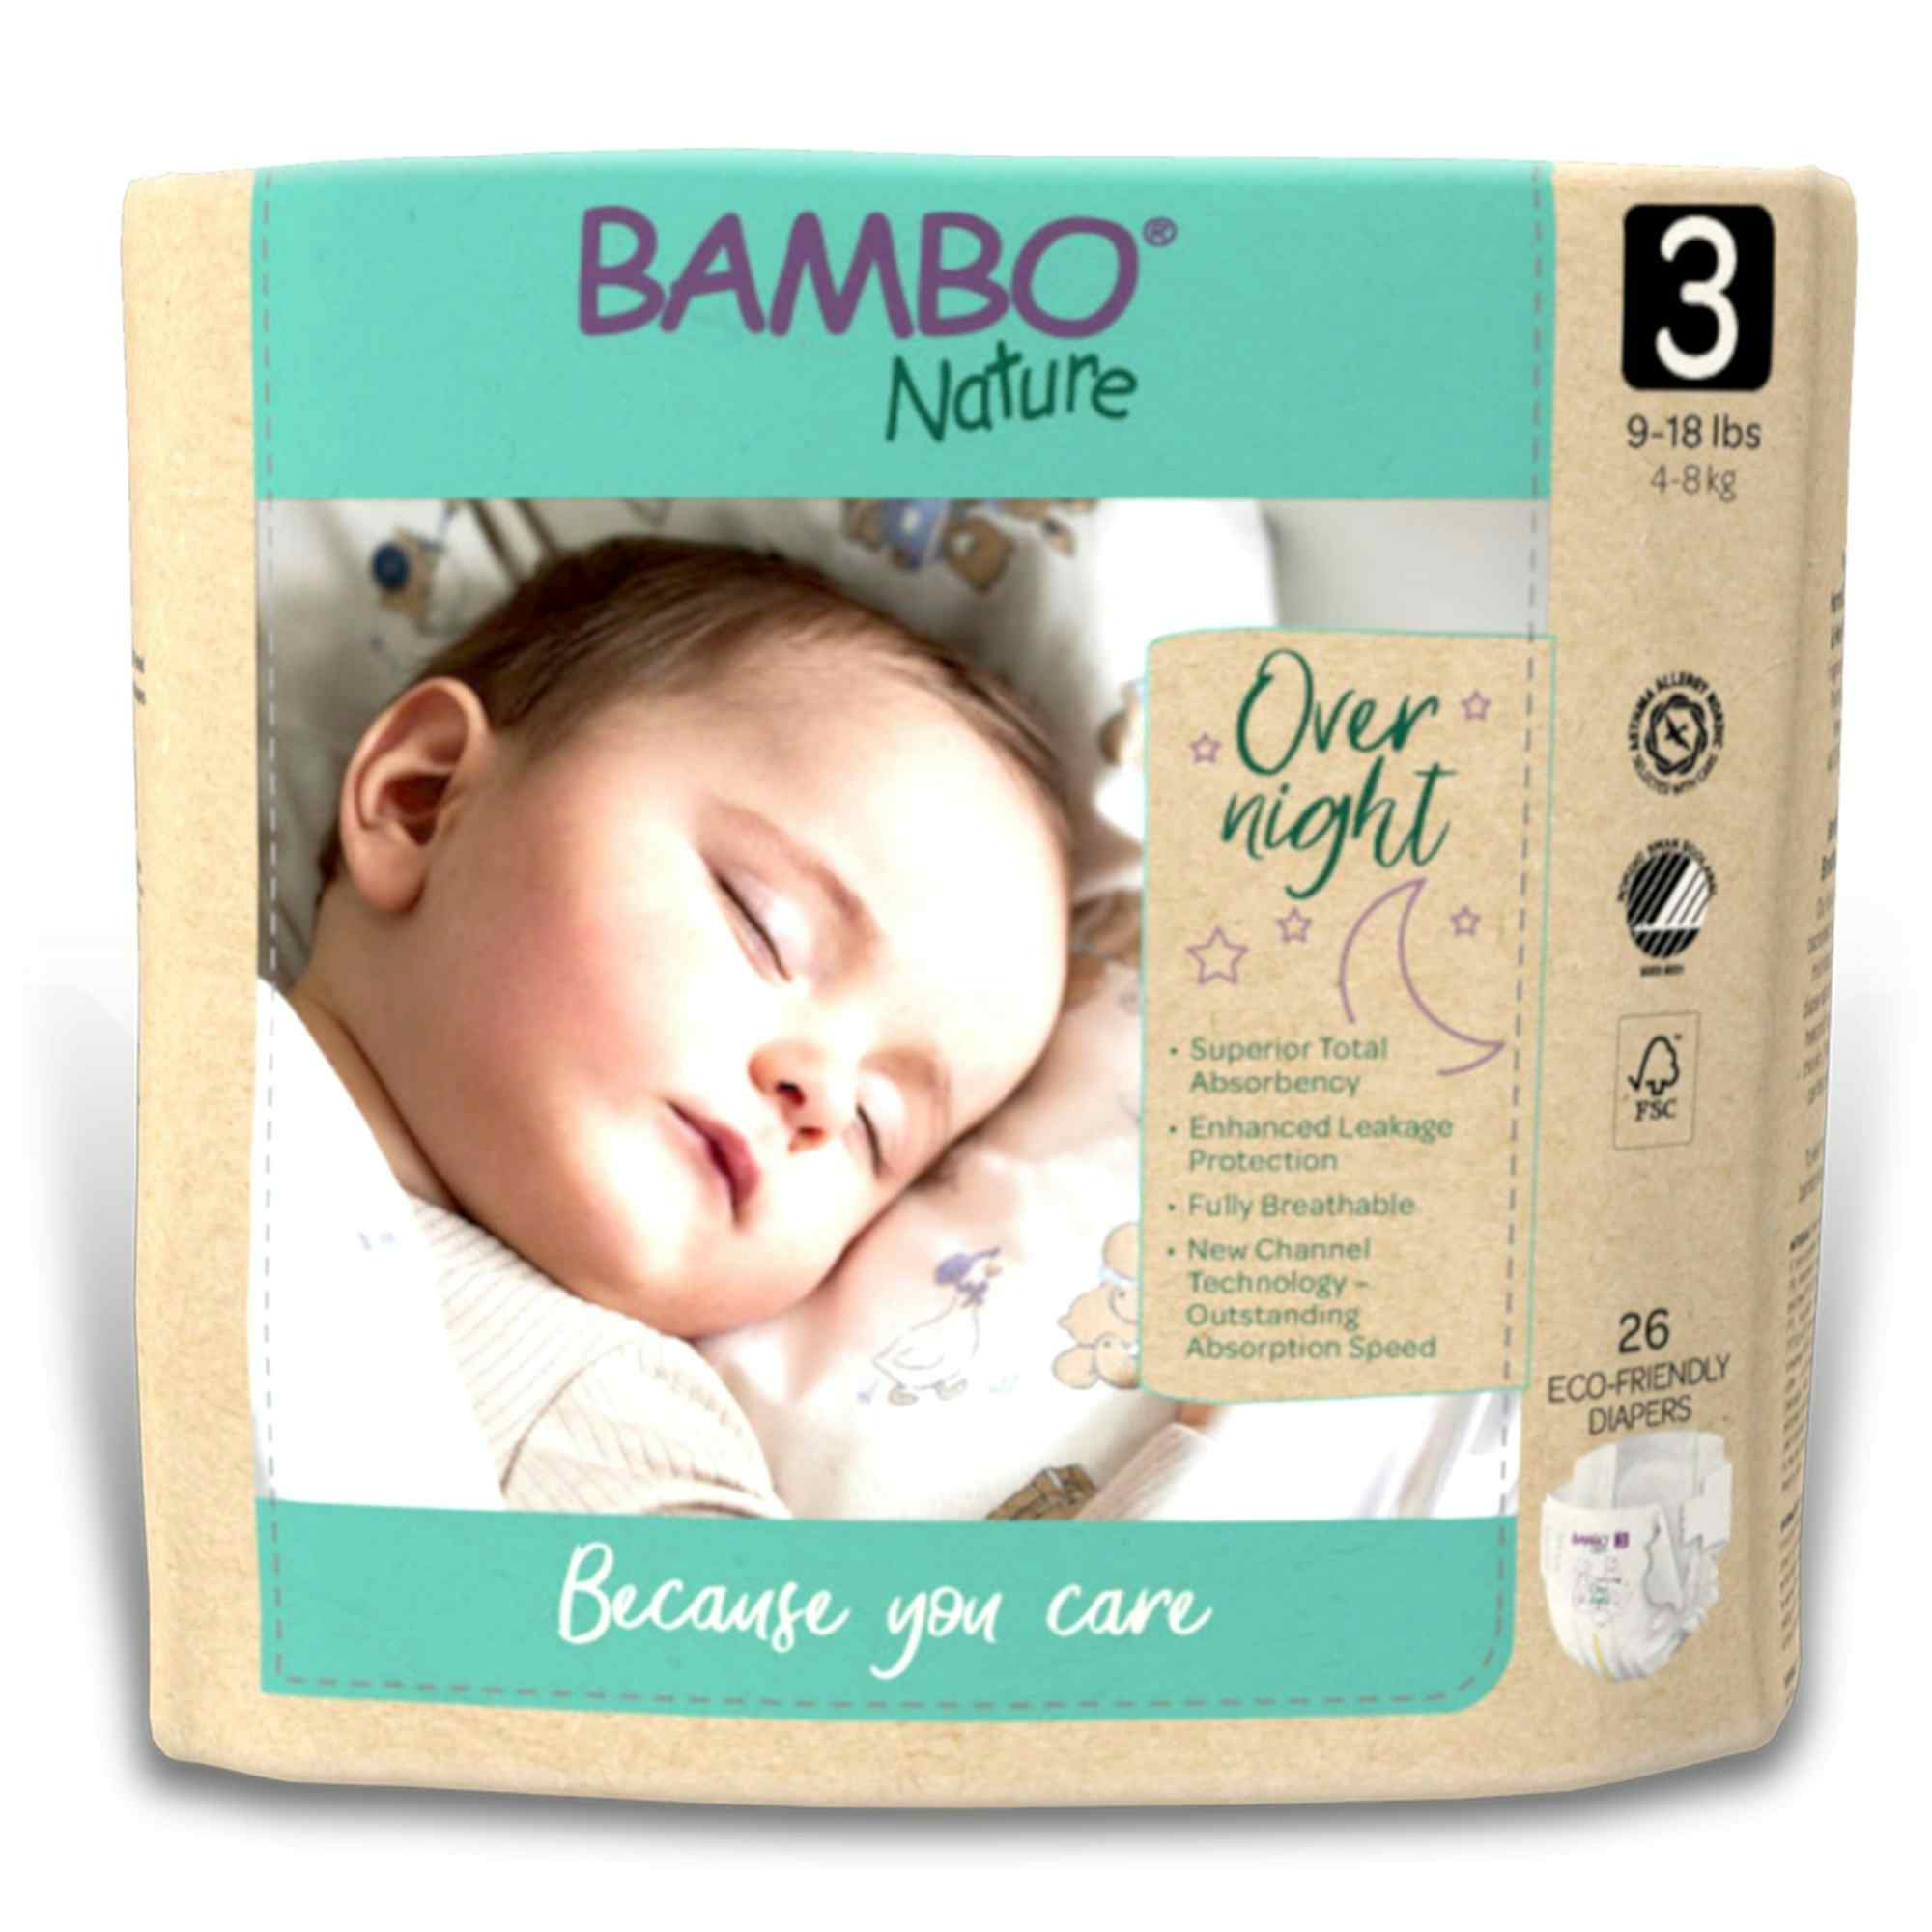 Bambo Nature Overnight Baby Diapers with Tabs, Heavy Absorbency, 1000021009, Size 3 (9 to 18 lbs.) - Pack of 26